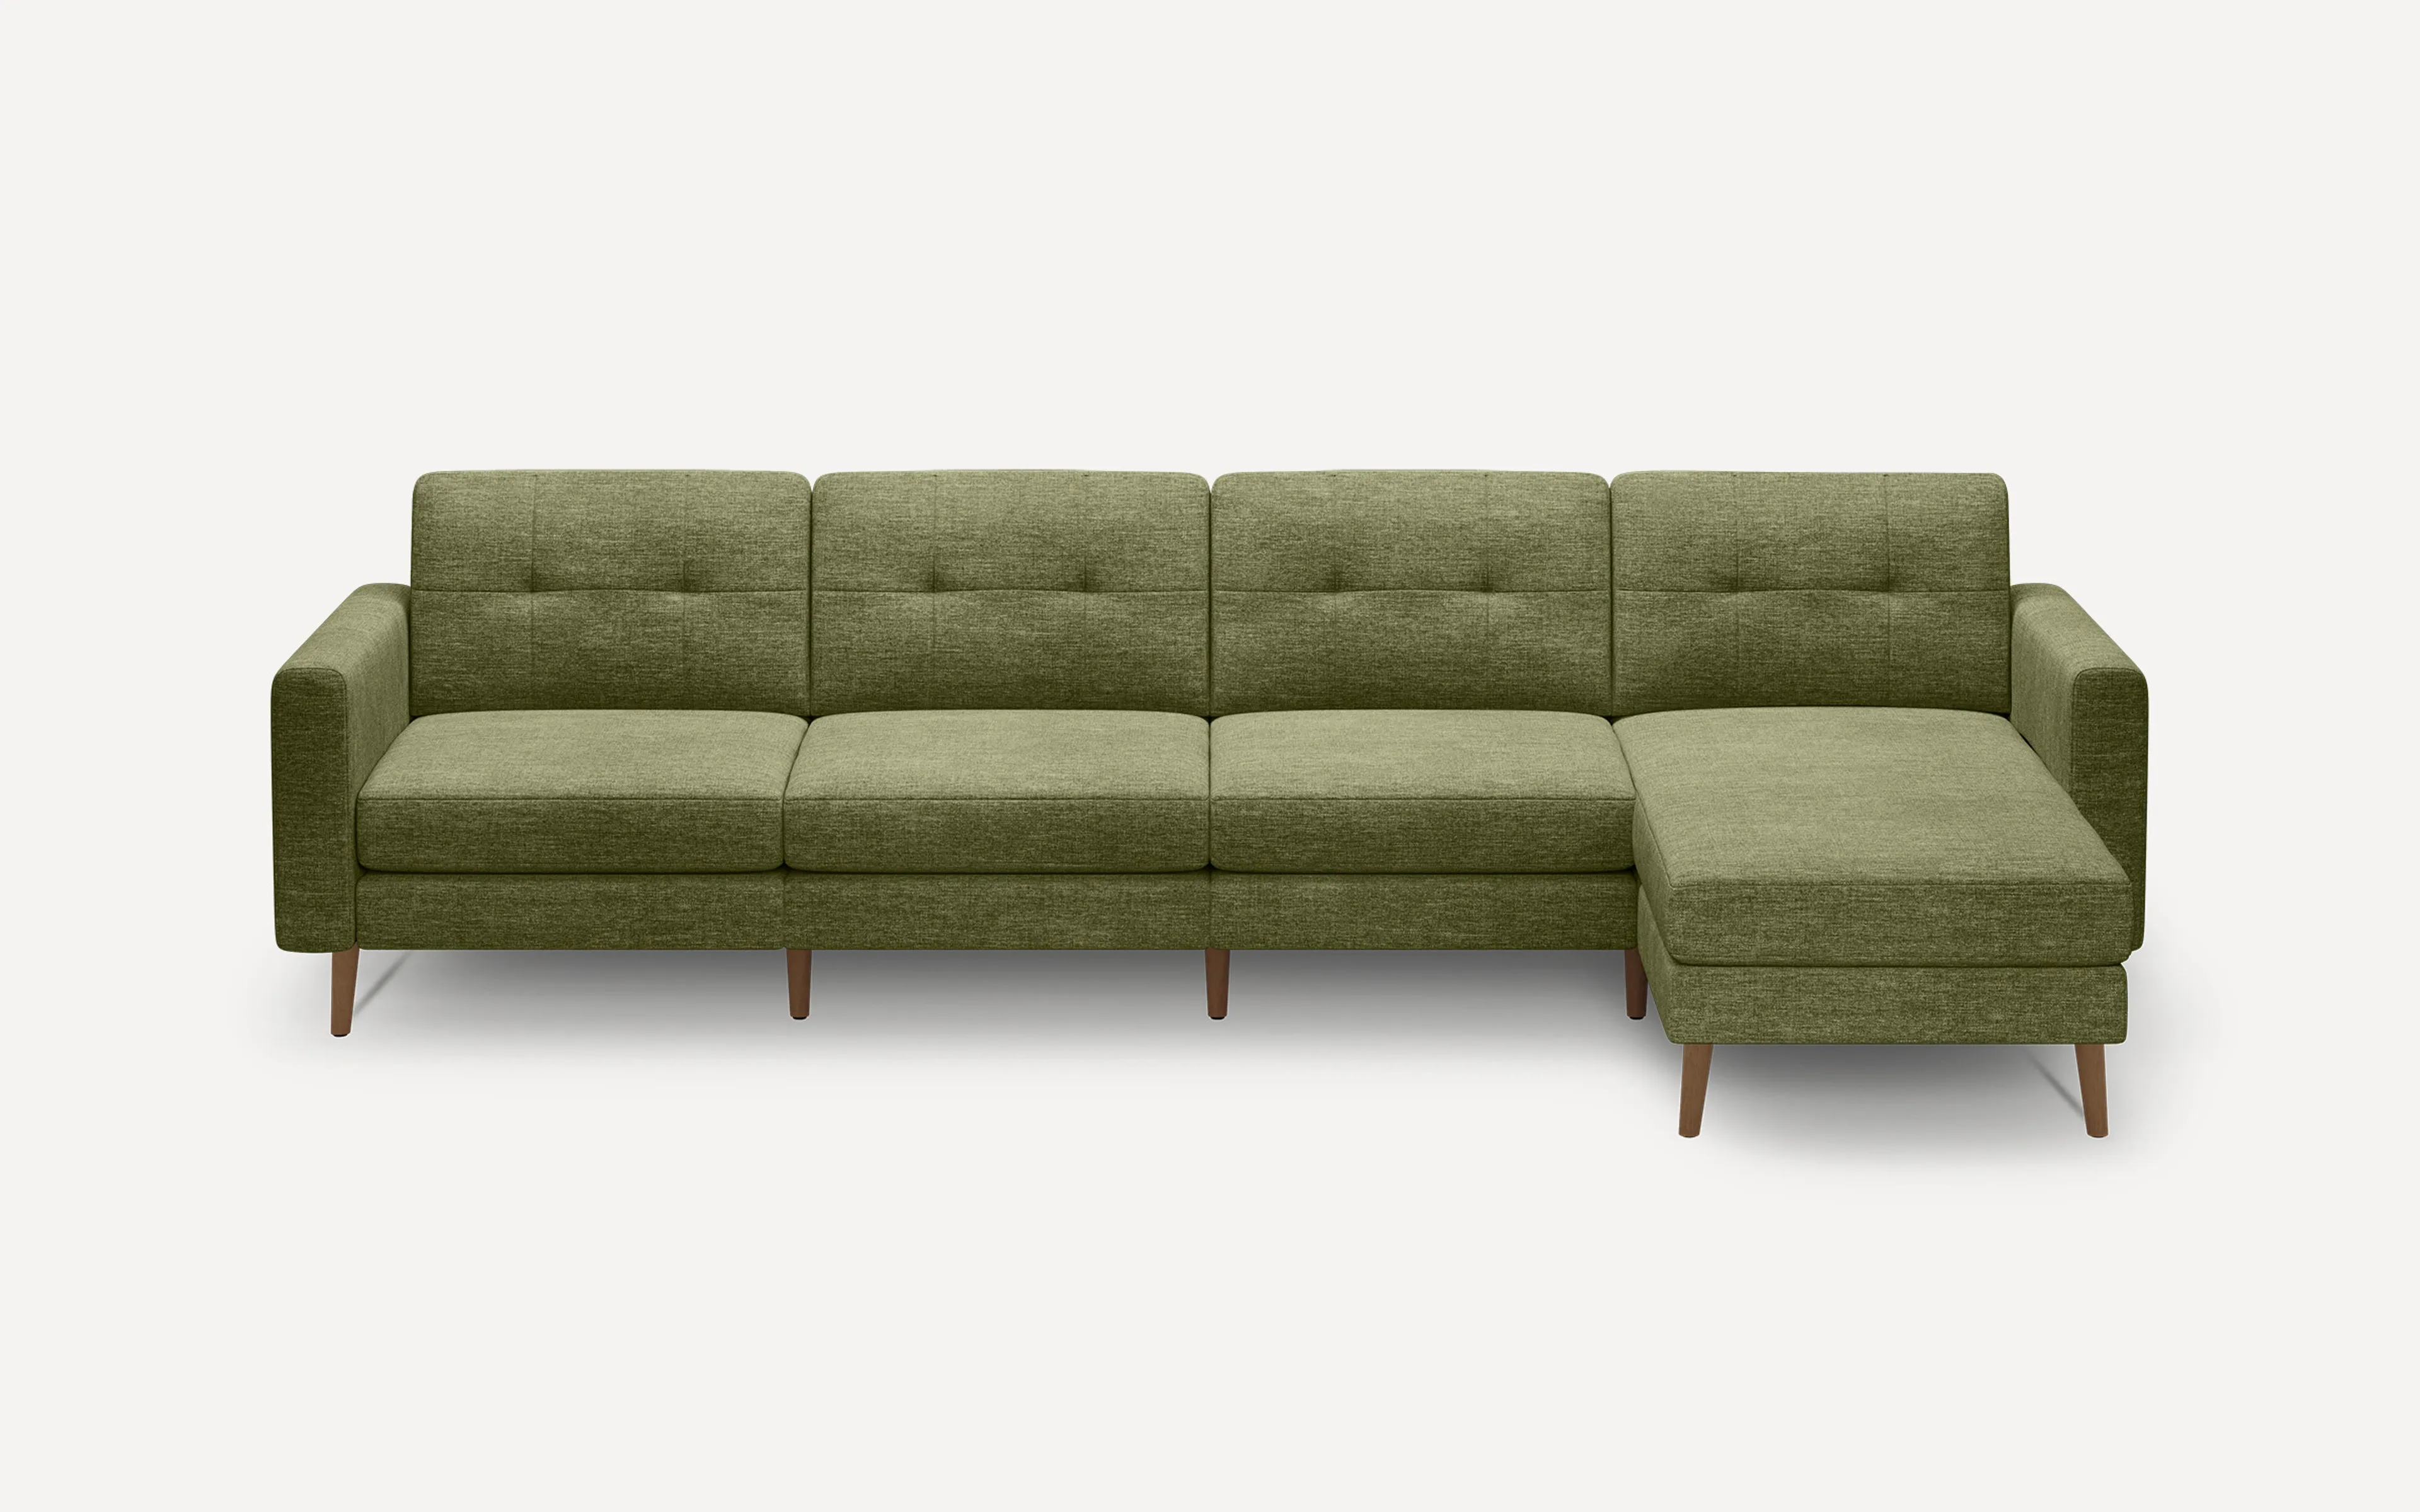 Original Nomad Chaise King Sofa in Moss Green Fabric